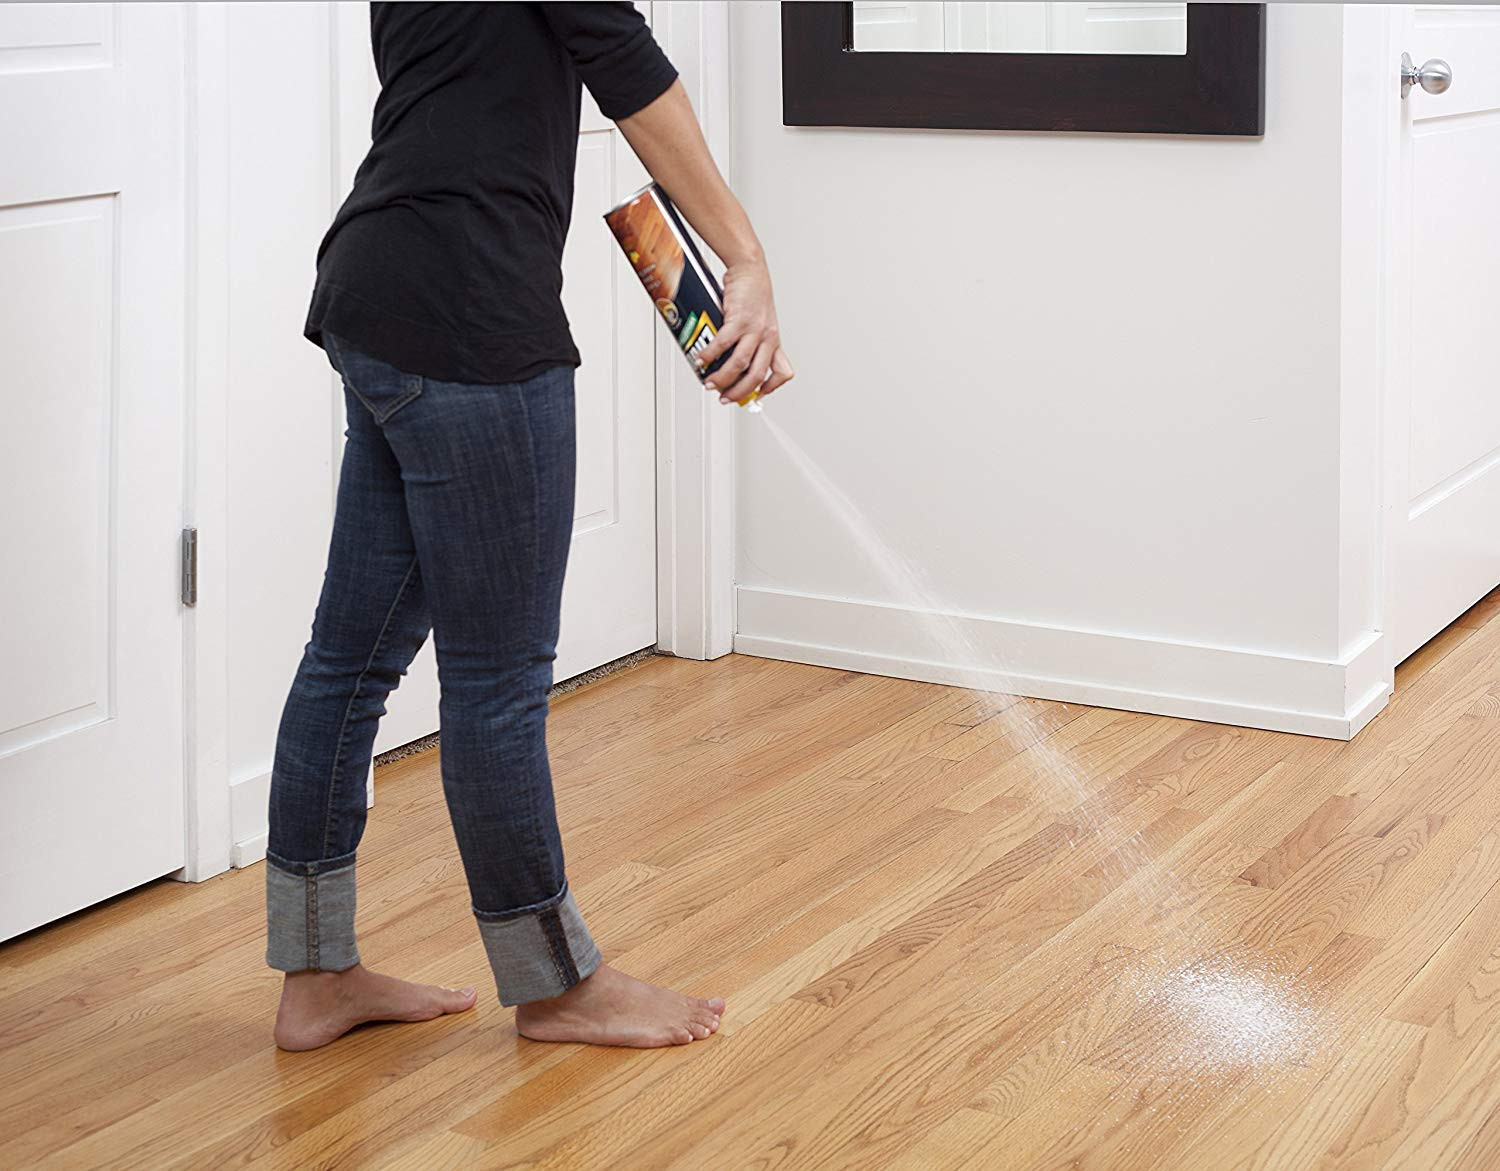 27 Stylish Hardwood Flooring Business for Sale 2024 free download hardwood flooring business for sale of amazon com endust wood floor cleaner 16 ounce health personal care pertaining to 911if6q1uol sl1500